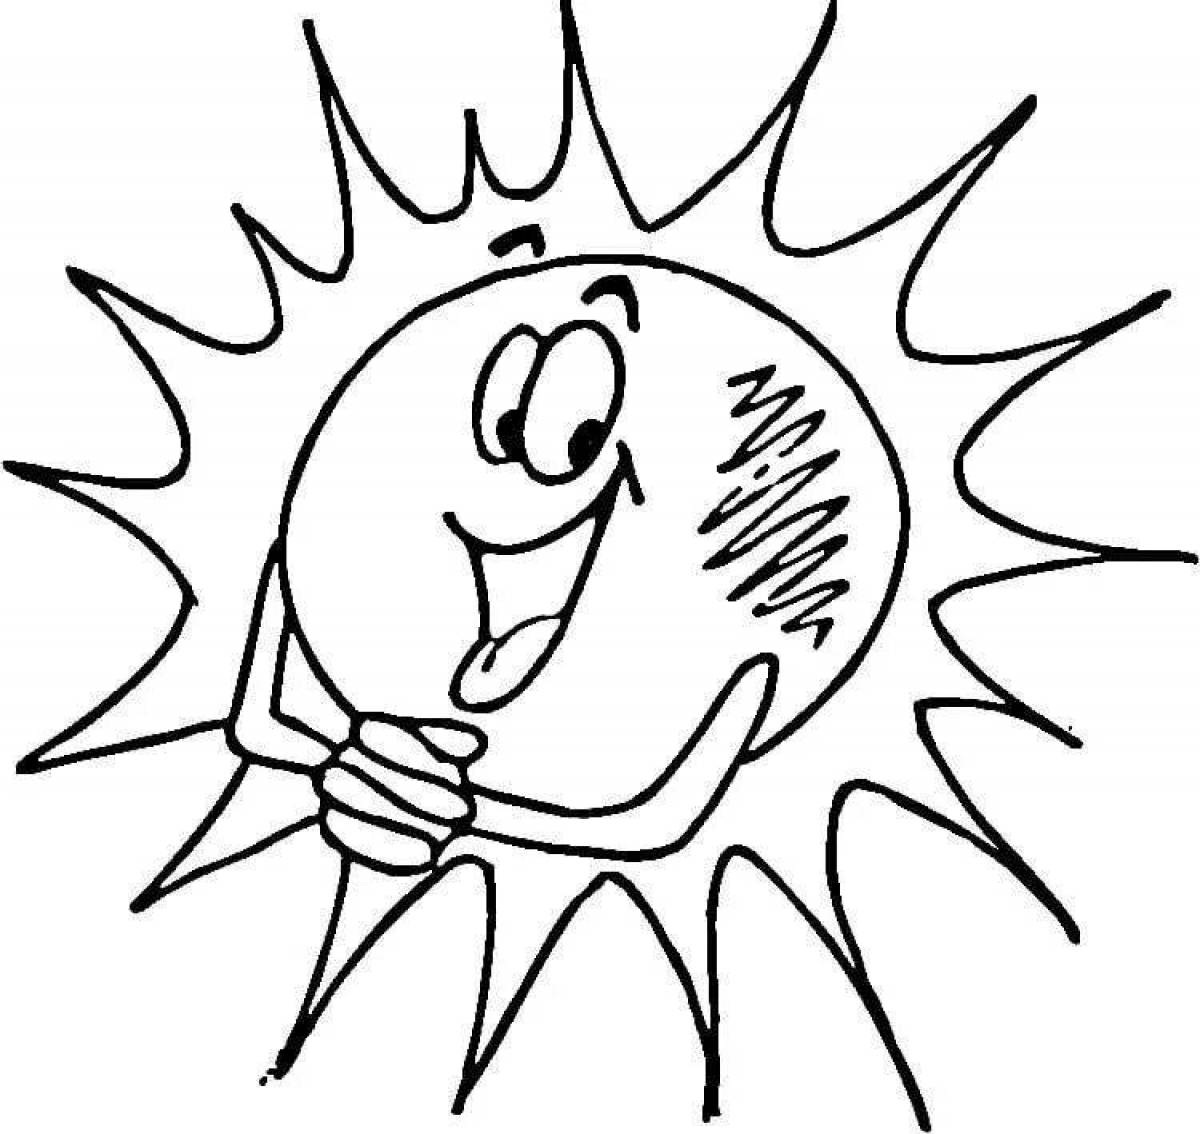 Awesome sun coloring picture